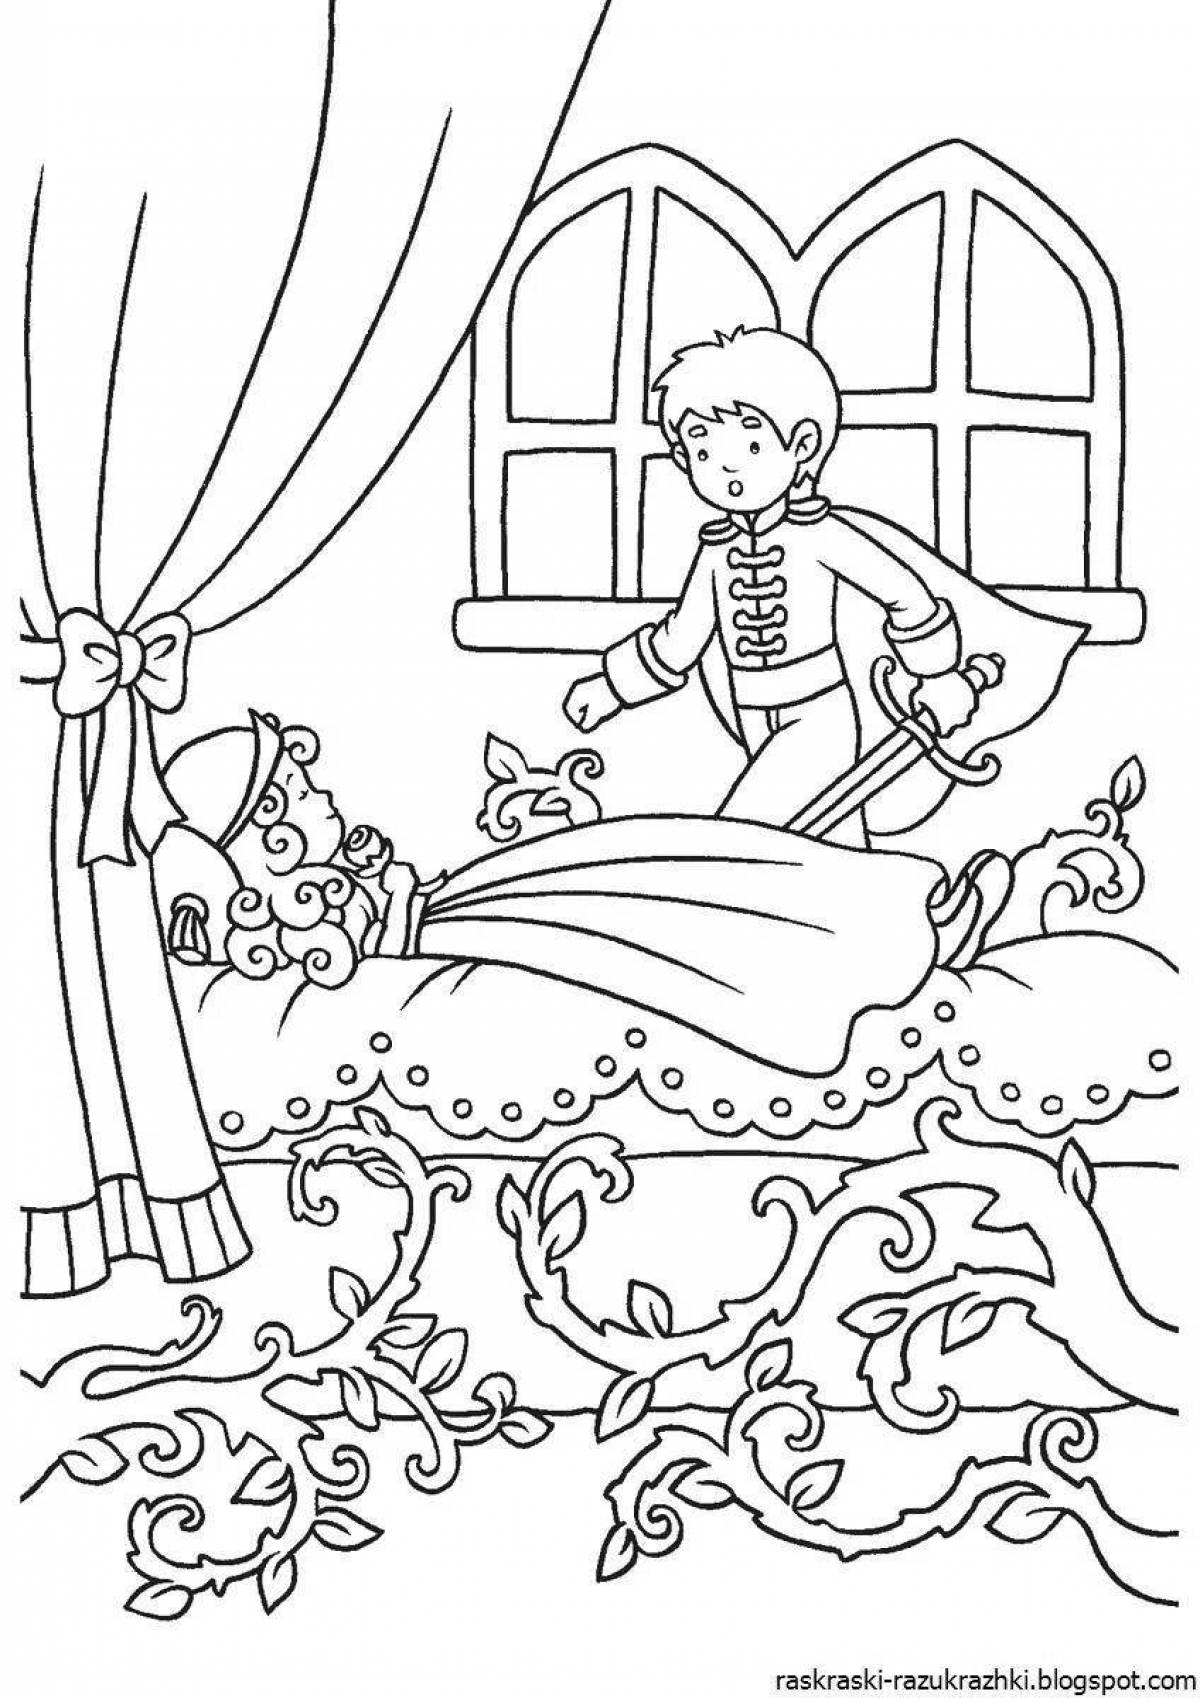 A fascinating coloring book of fairy-tale characters for children 6-7 years old